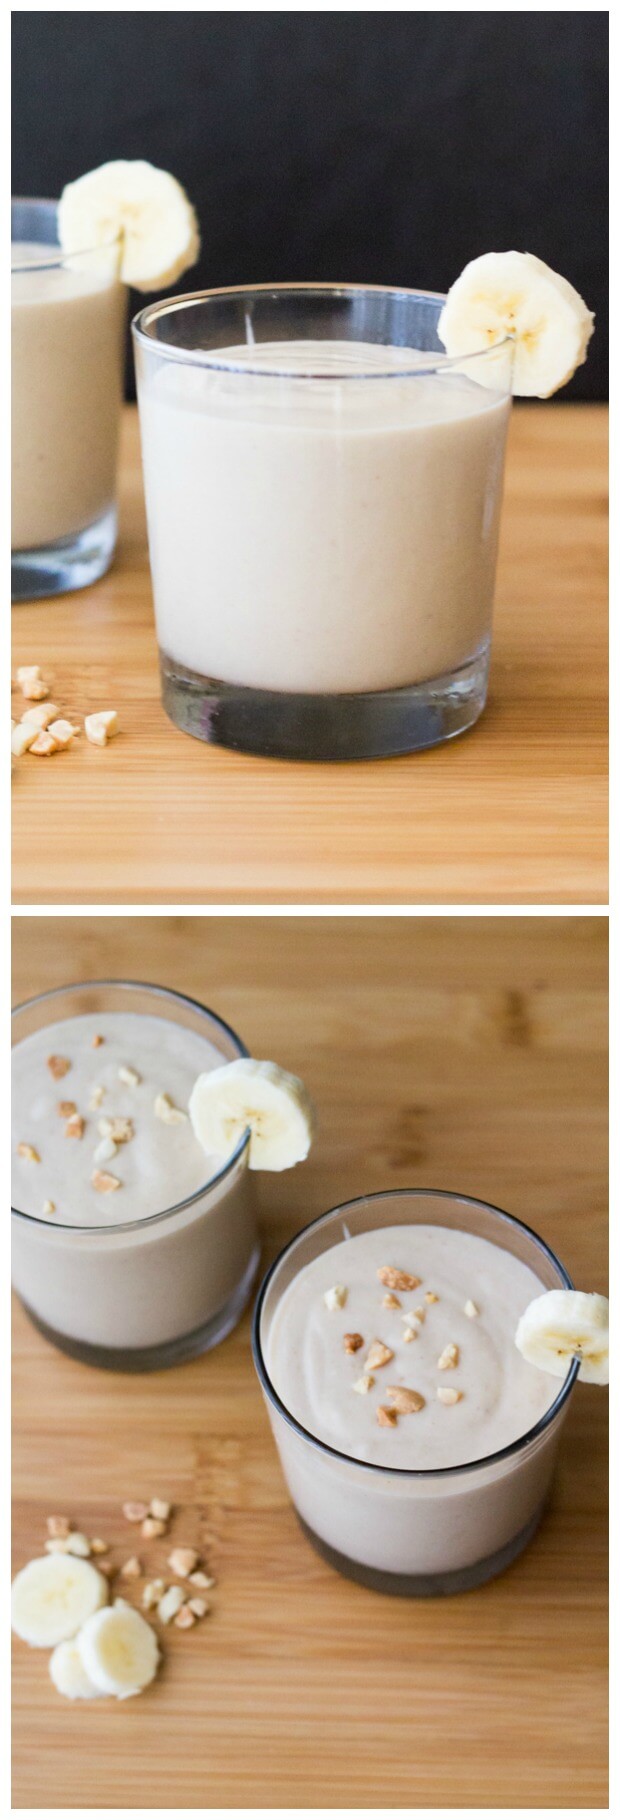 Thick & creamy Peanut Butter Banana Smoothie. Super delicious, healthy & filling - make it for breakfast or a post-workout snack!